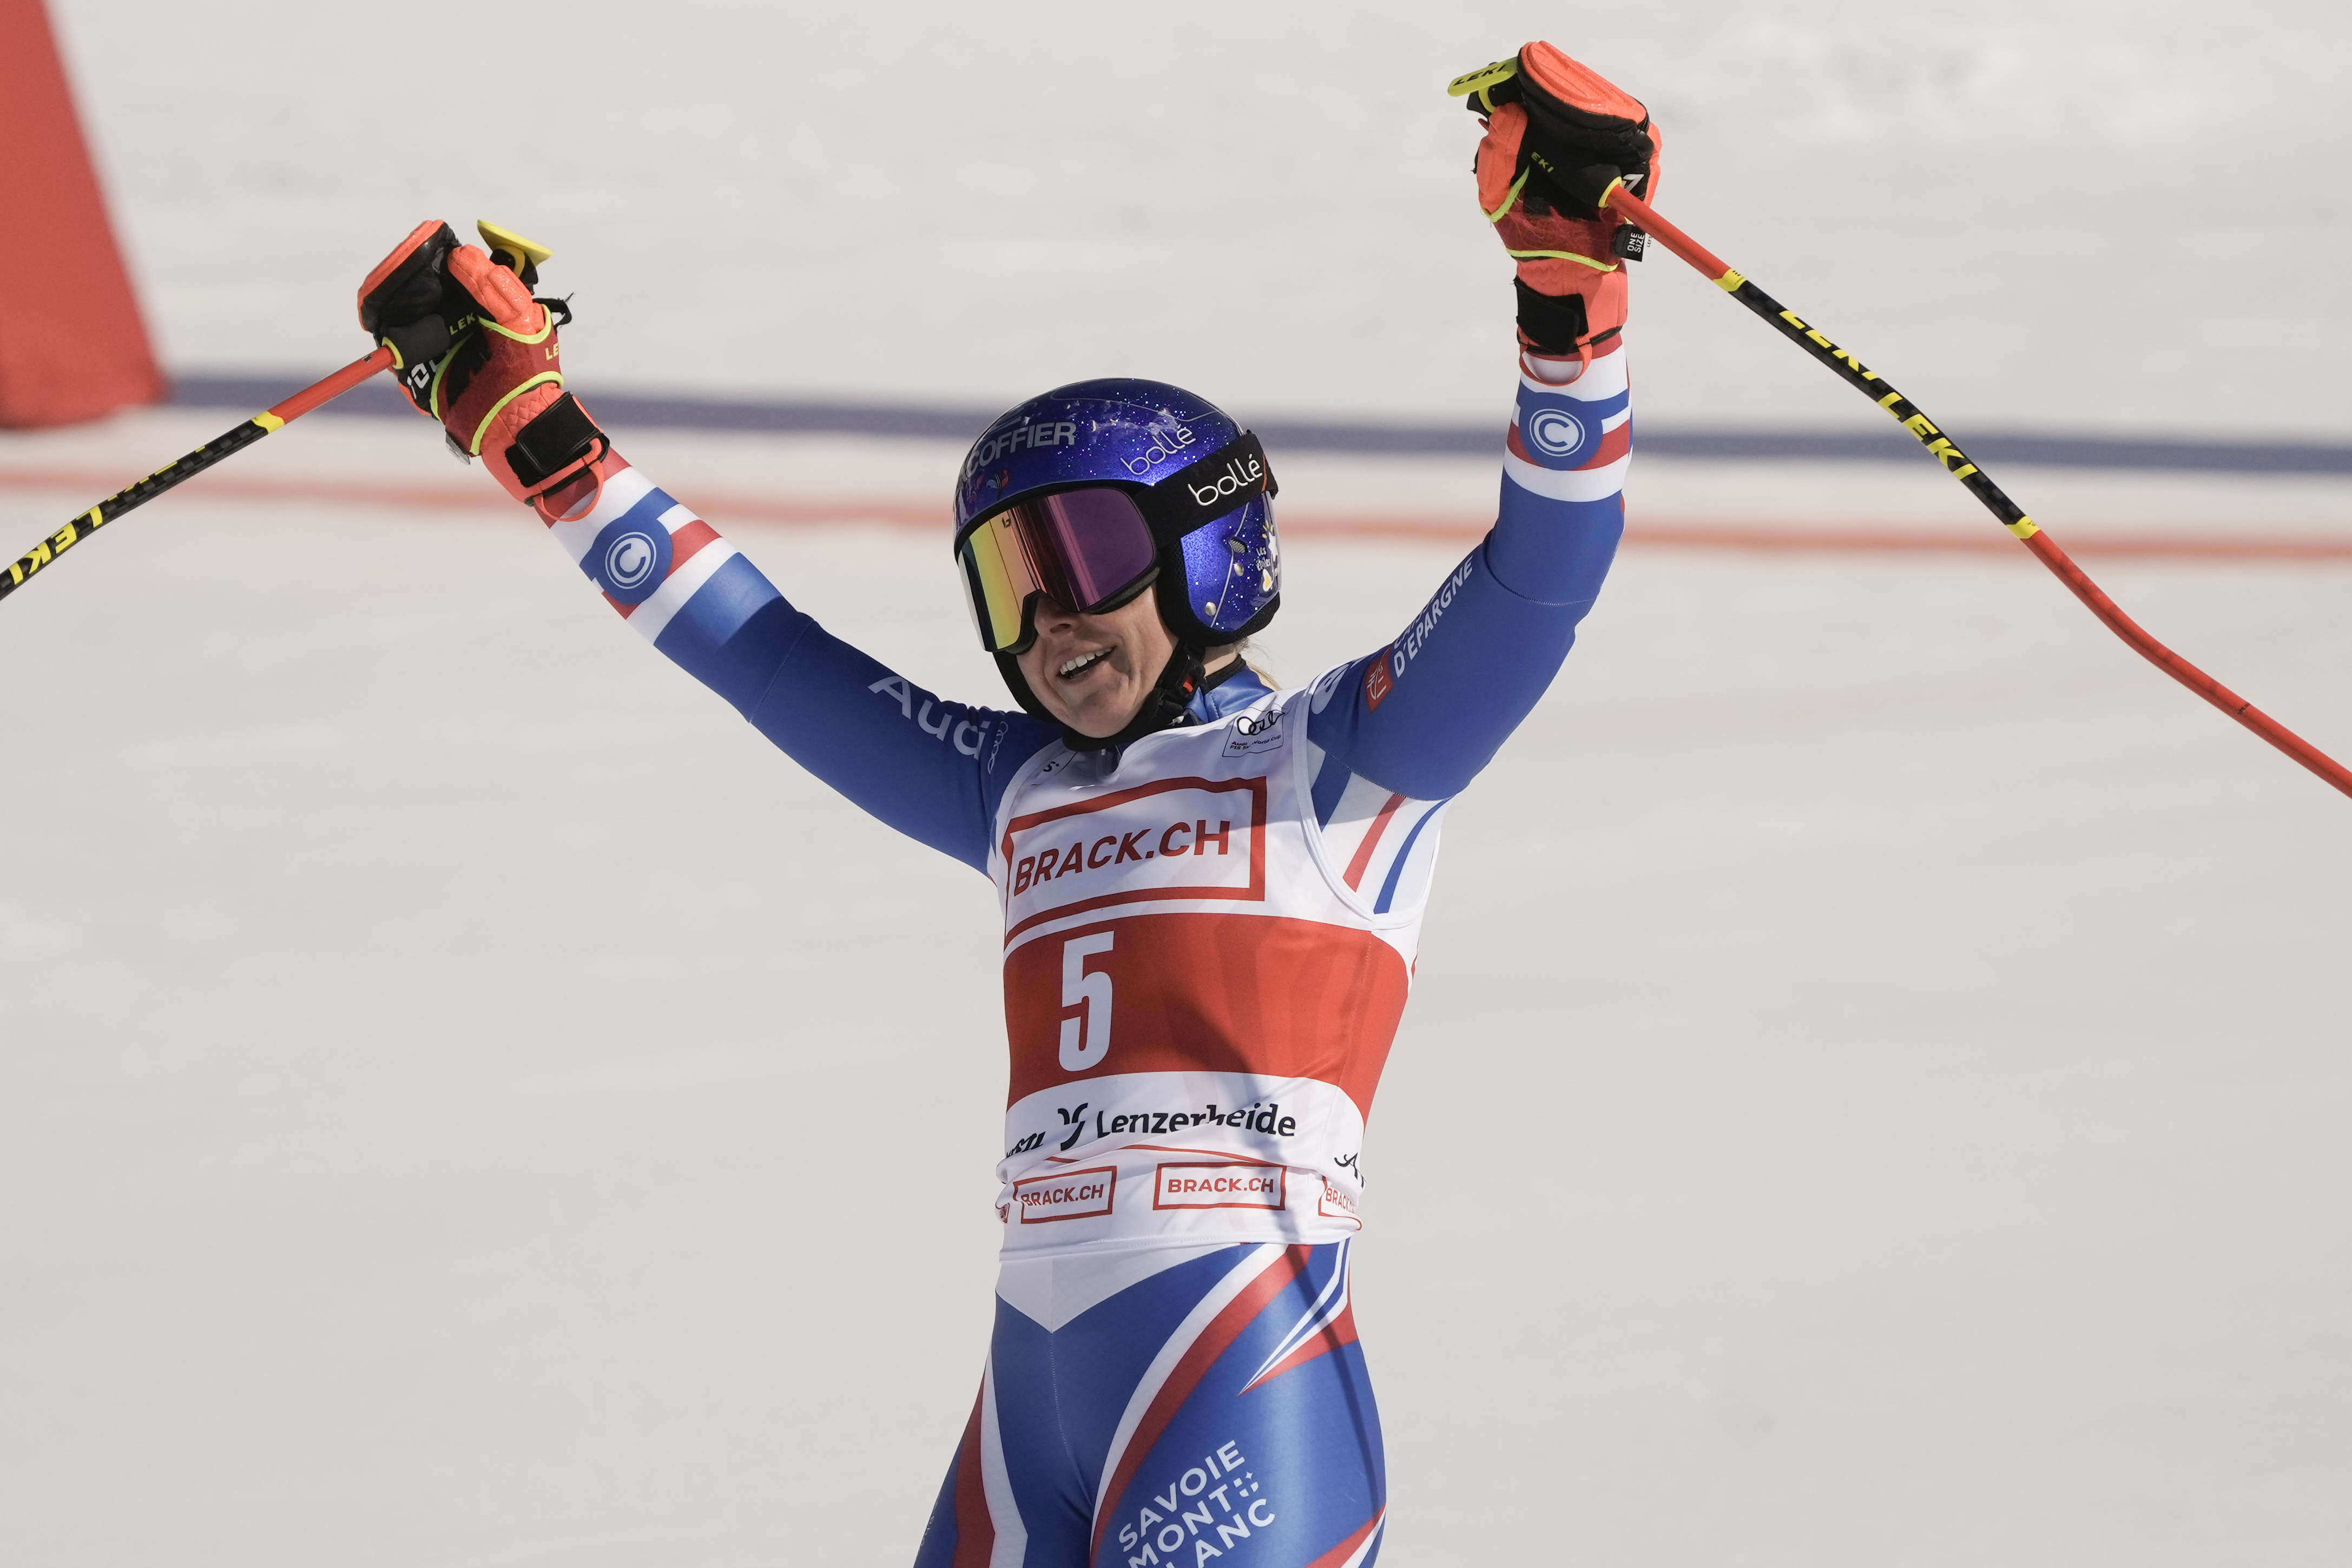 Shiffrin pads World Cup lead in giant slalom won by Worley